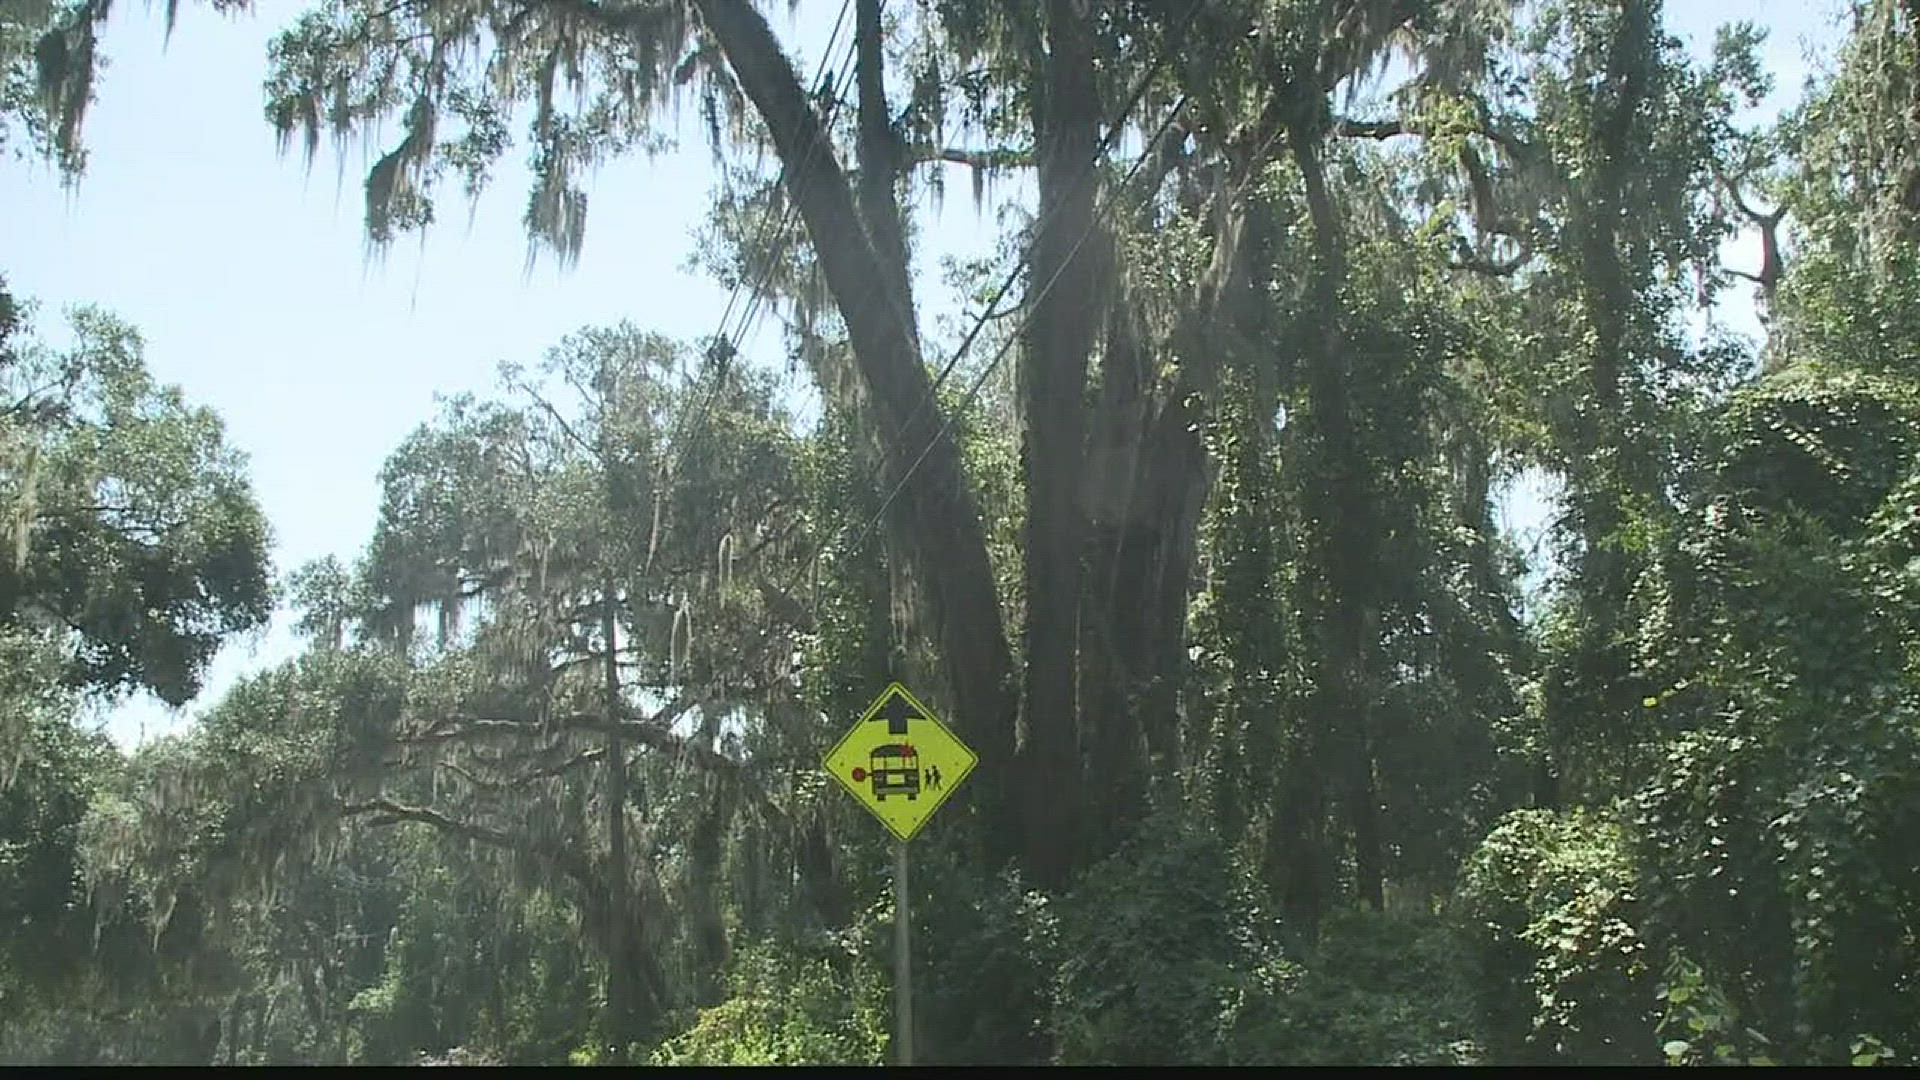 A power worker was shocked while working on a line in St. Johns County